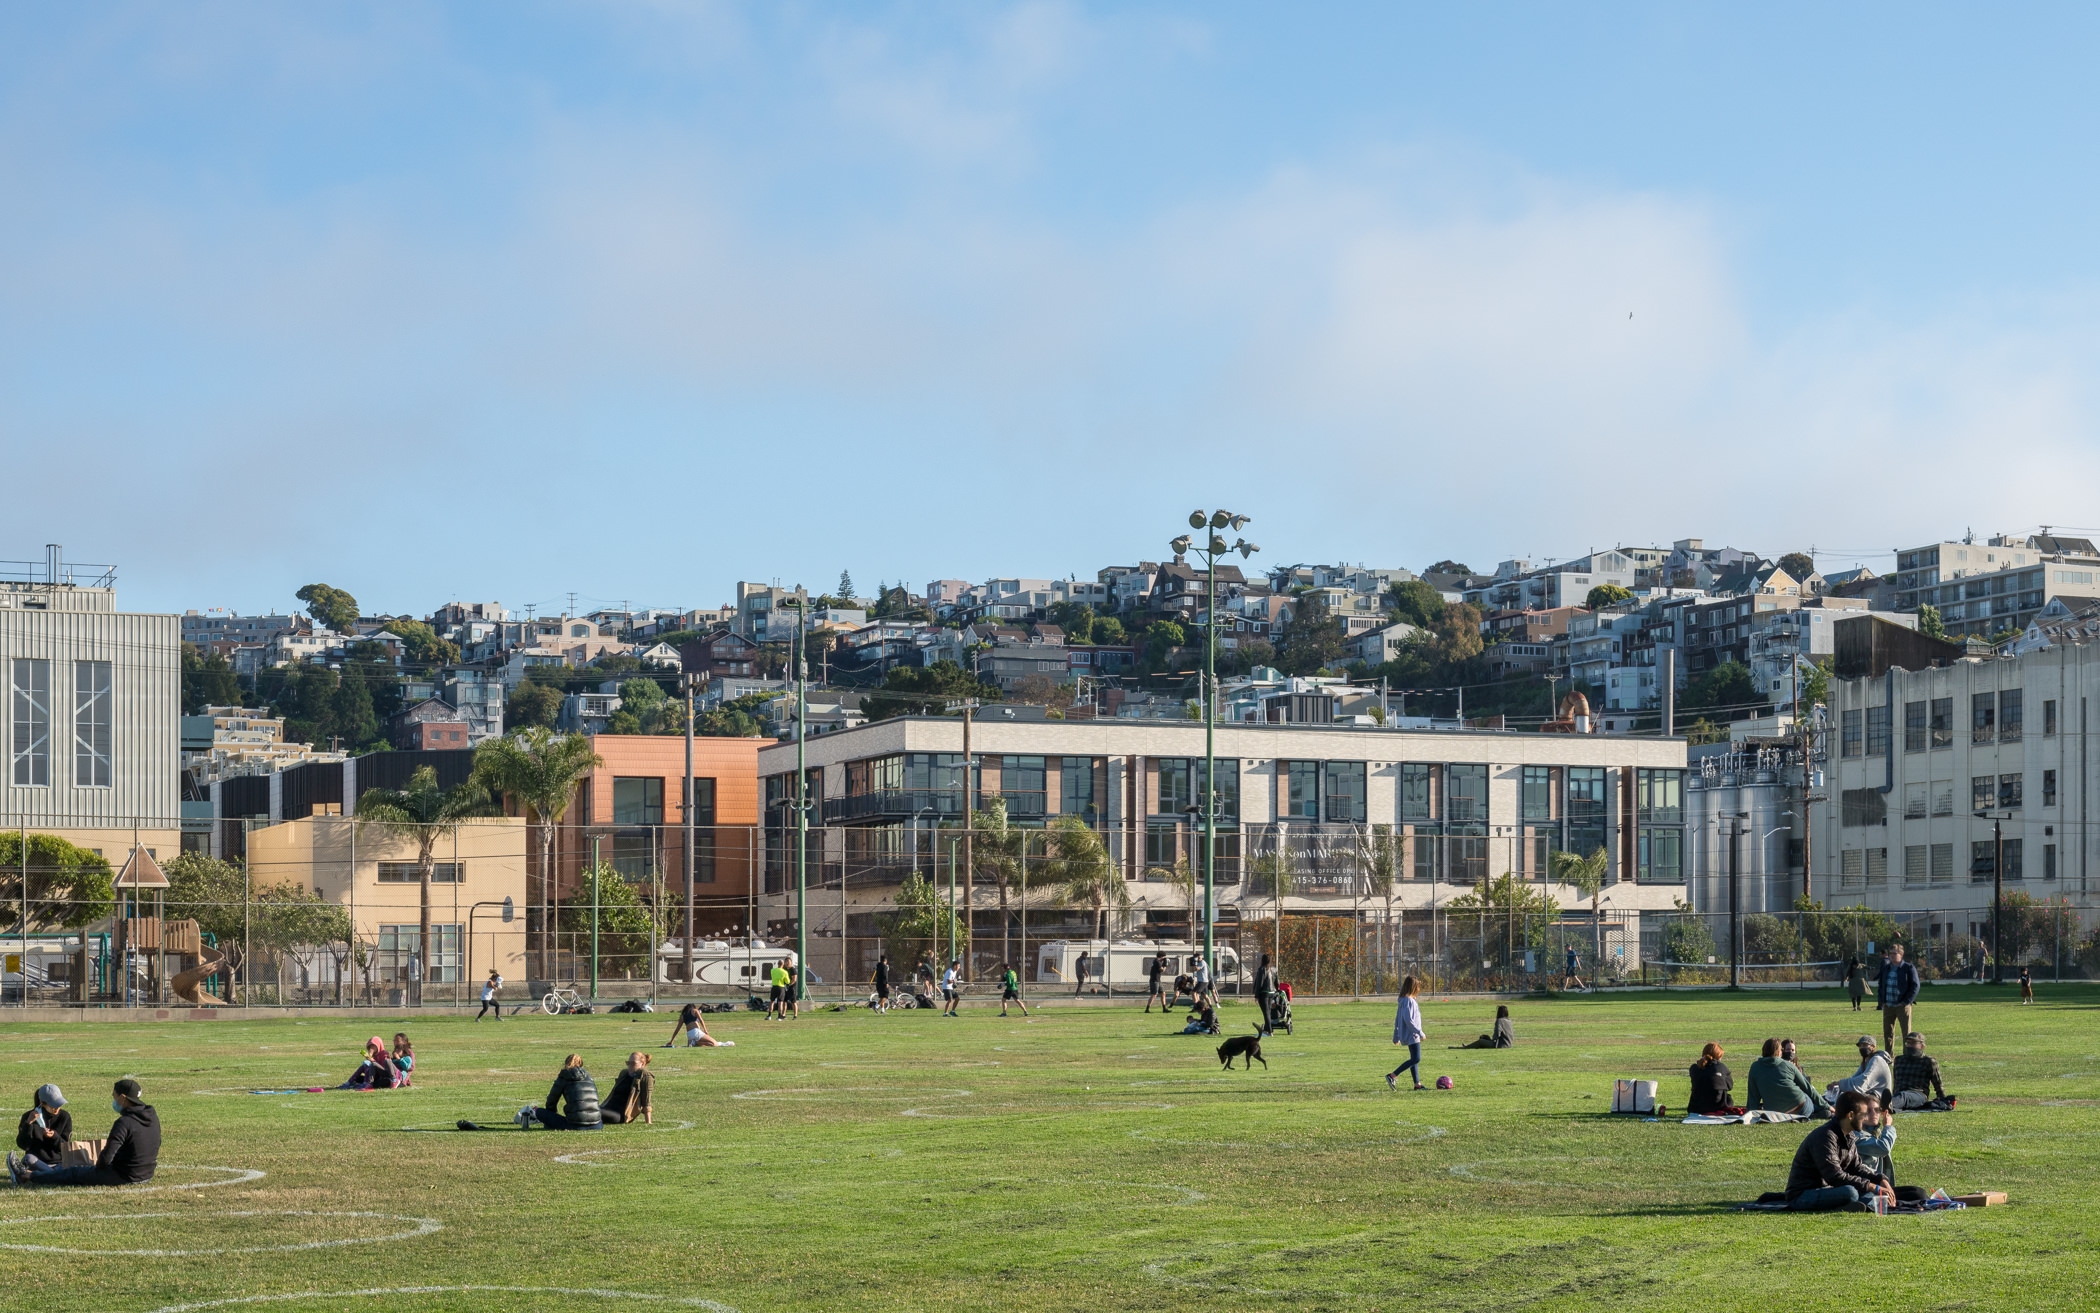 View from the adjacent park of Mason on Mariposa in San Francisco.